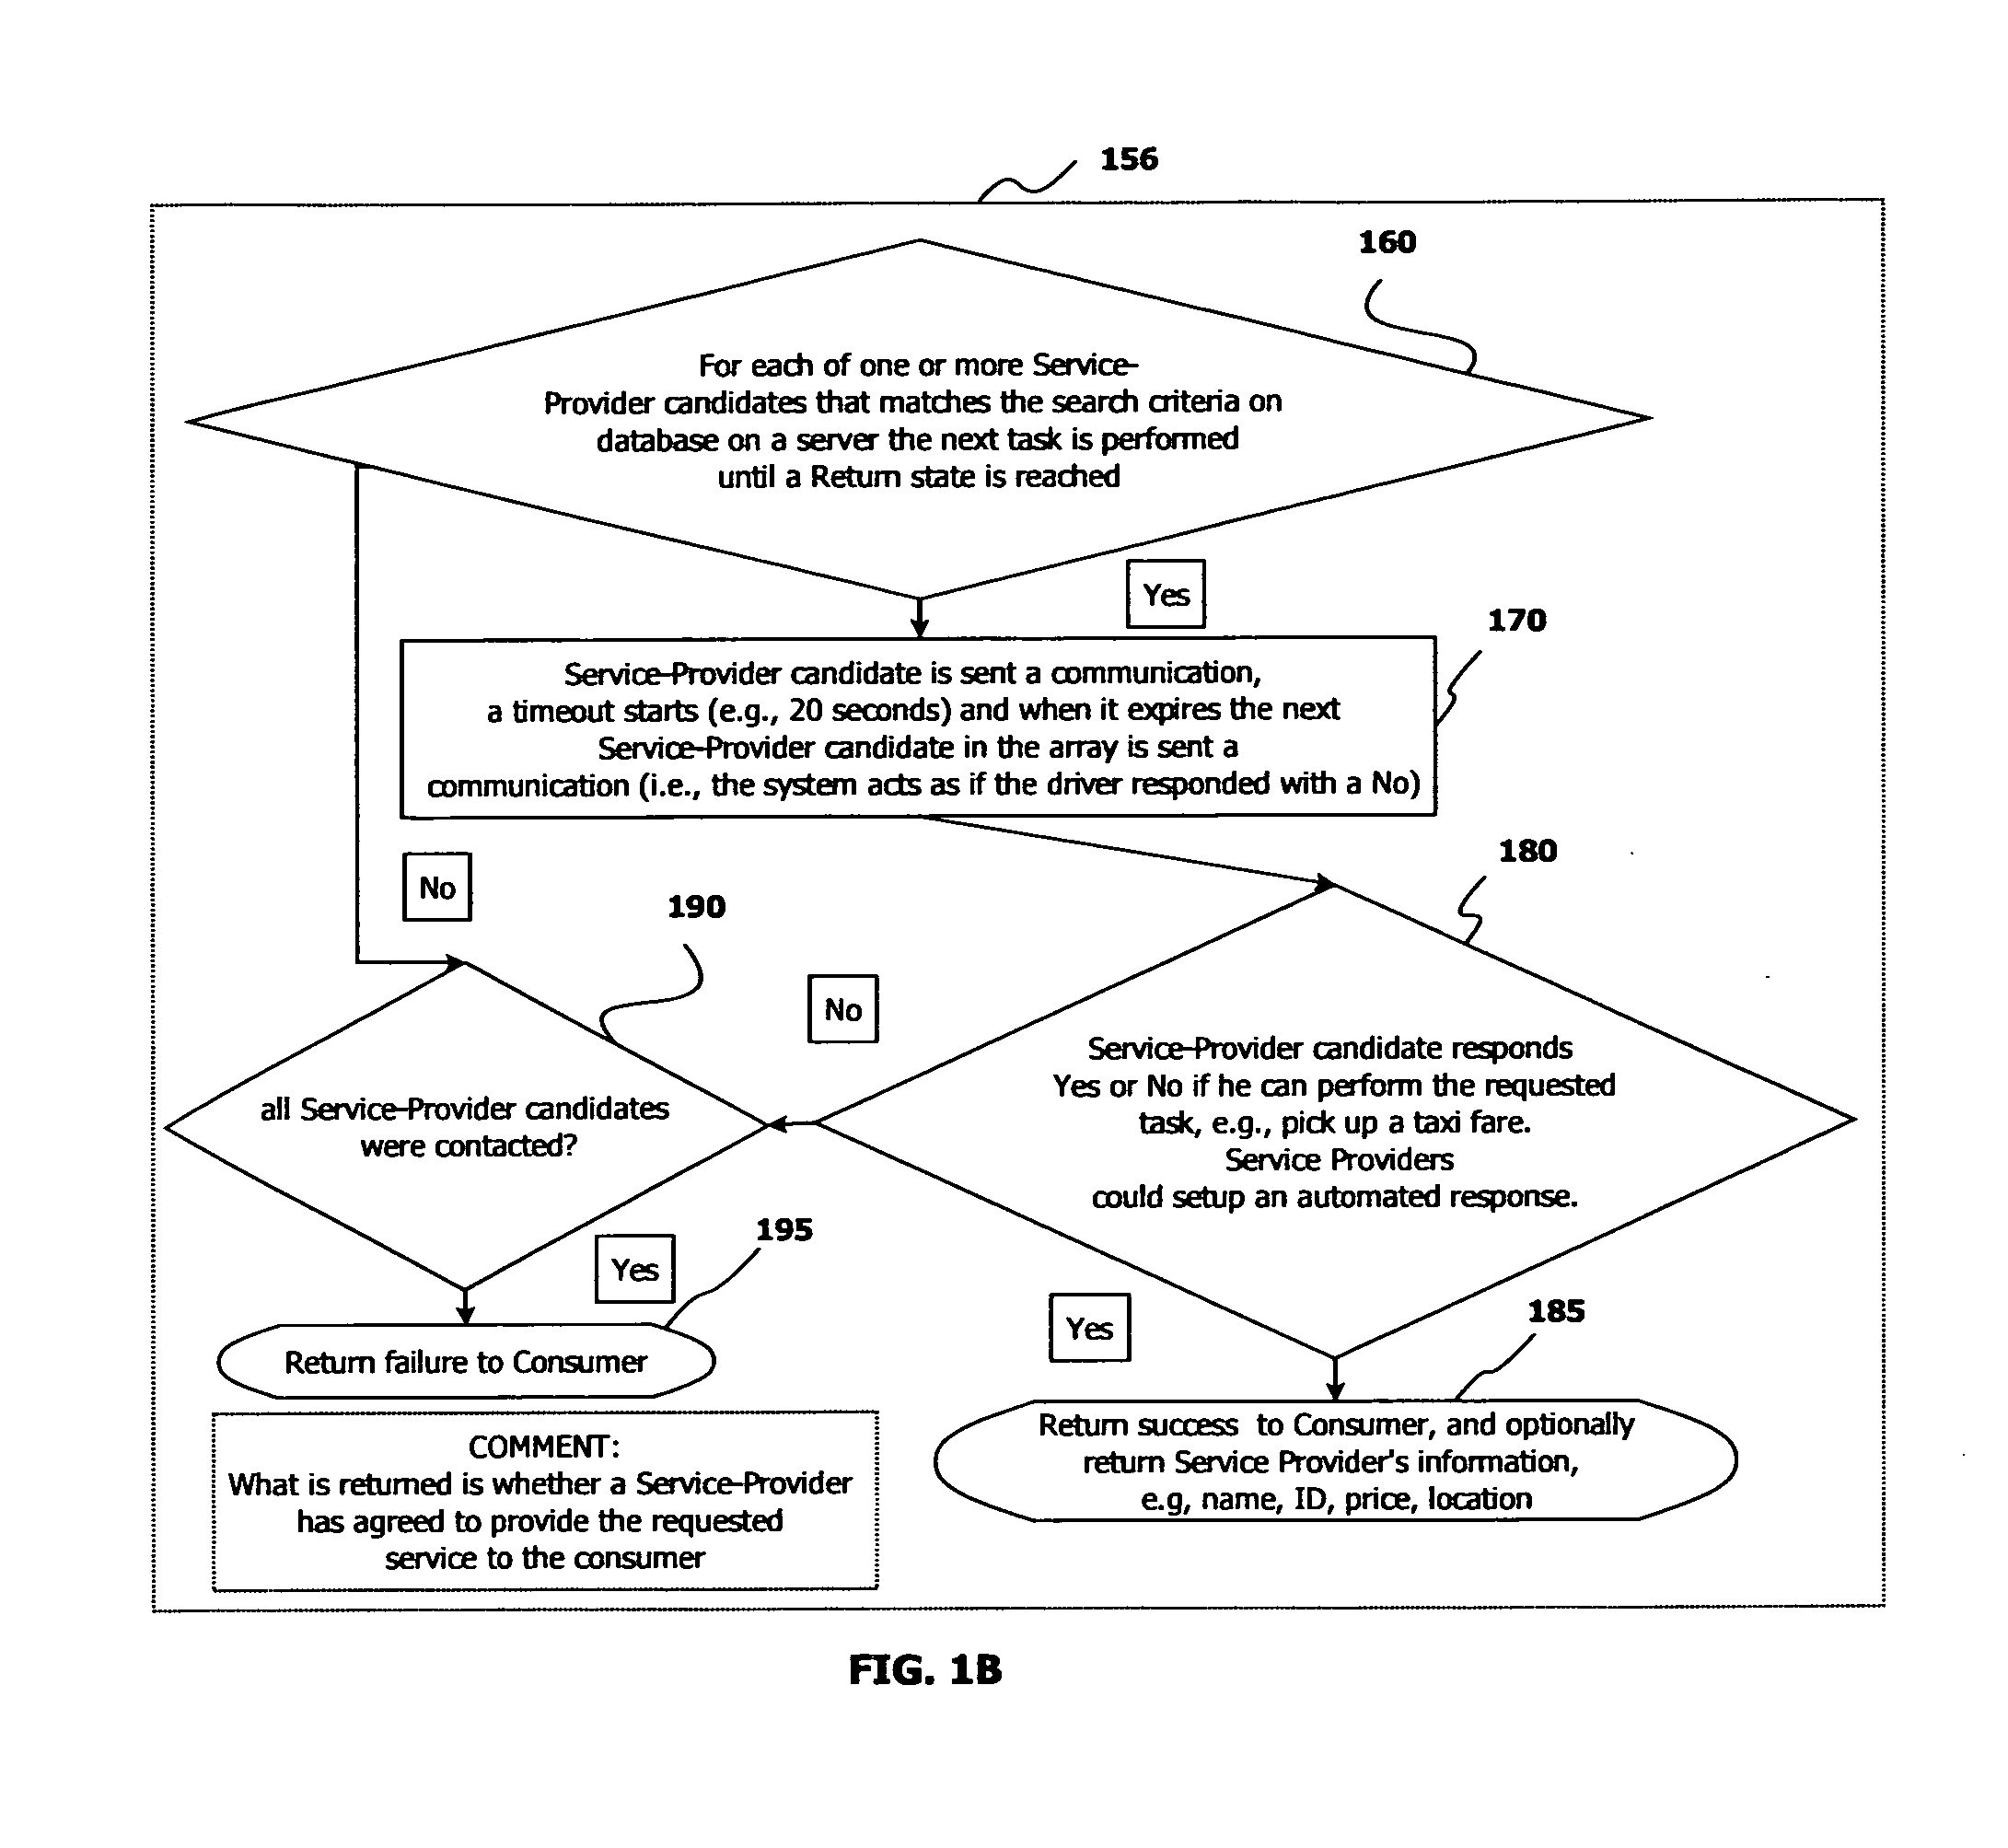 Method and System for the Location-Based Discovery and Validated Payment of a Service Provider